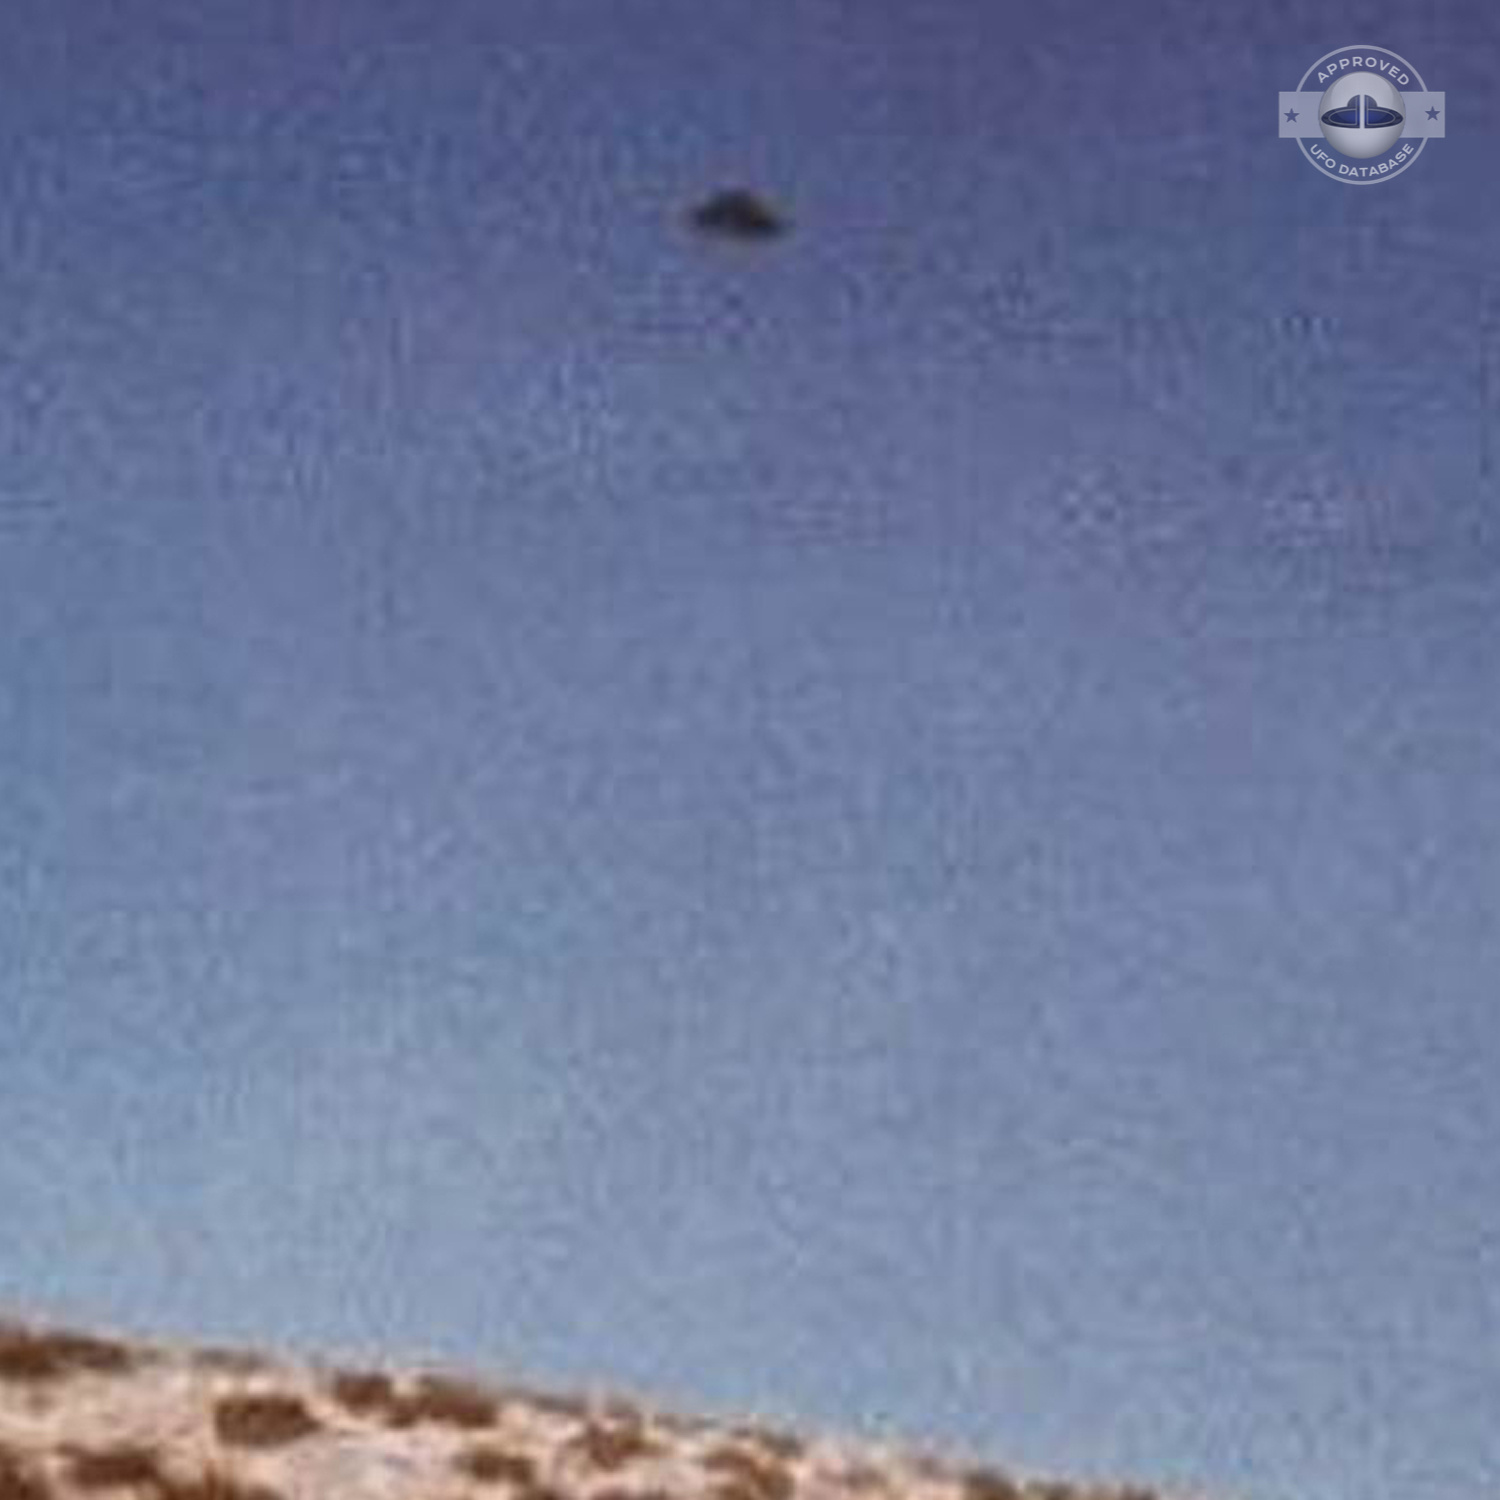 UFO seen over the Valdes peninsula near the city of Puerto Madryn UFO Picture #27-2